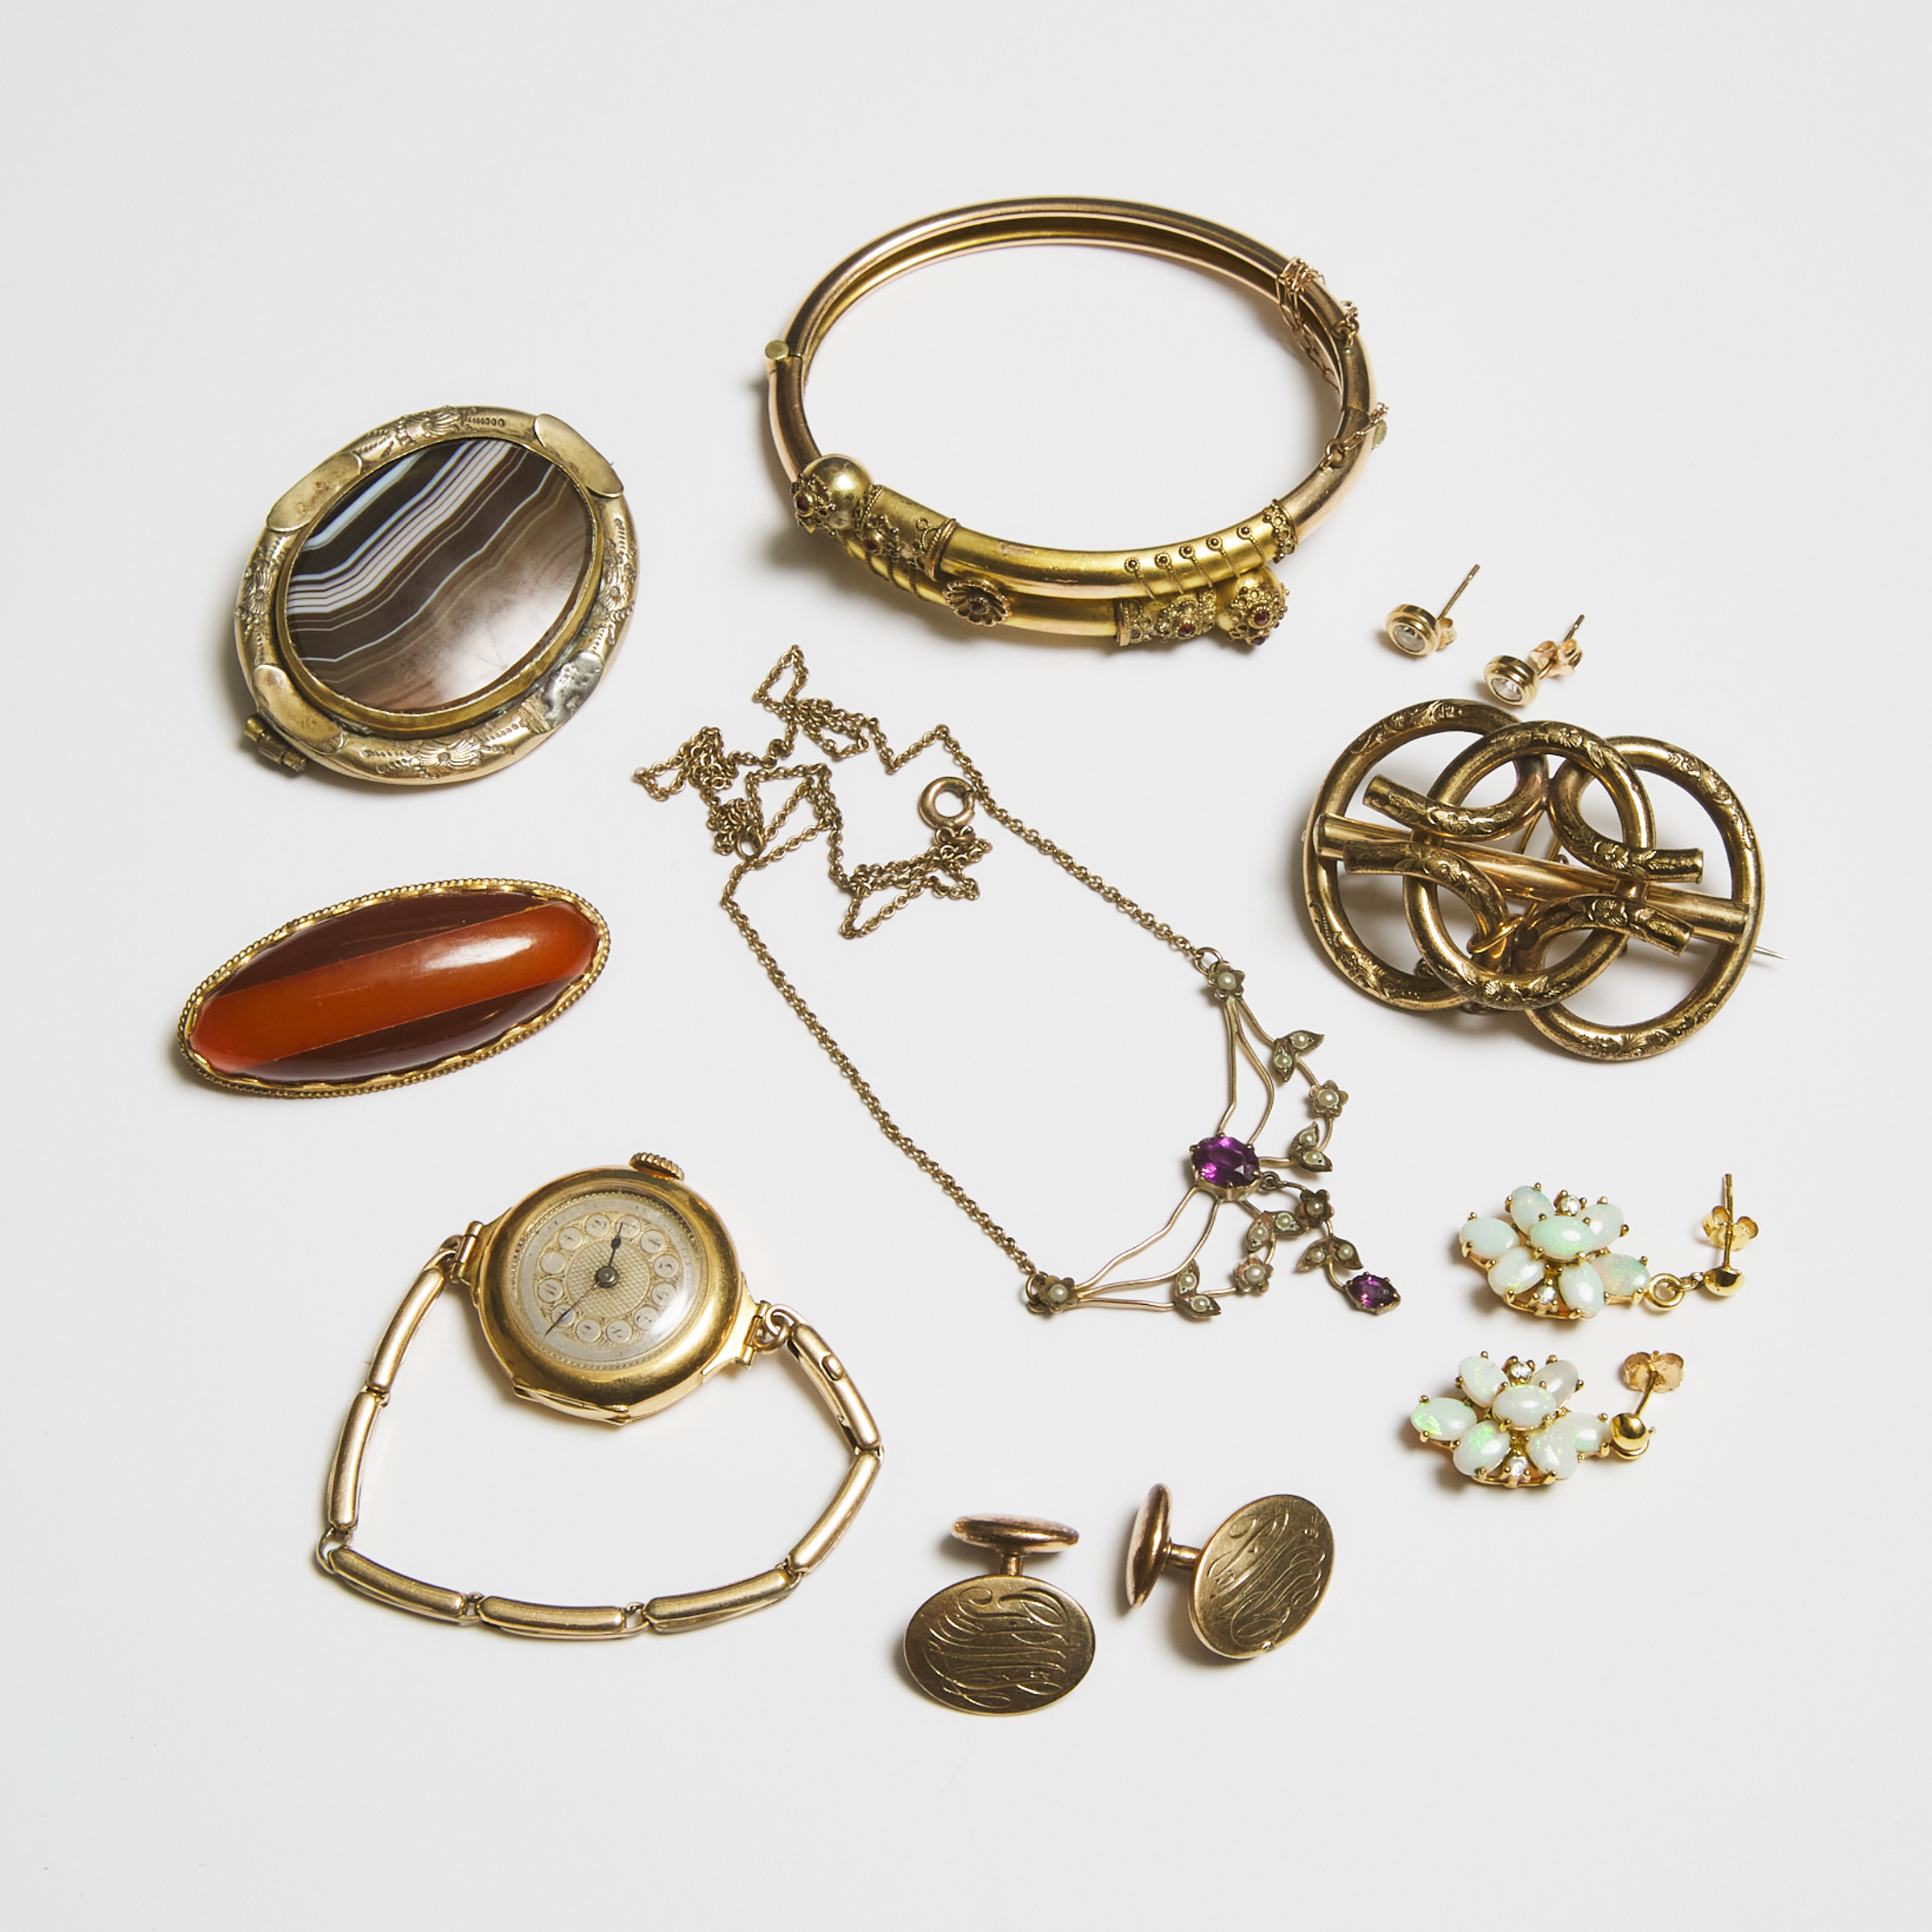 Small Quantity Of Various Gold-Filled And Gold Jewellery